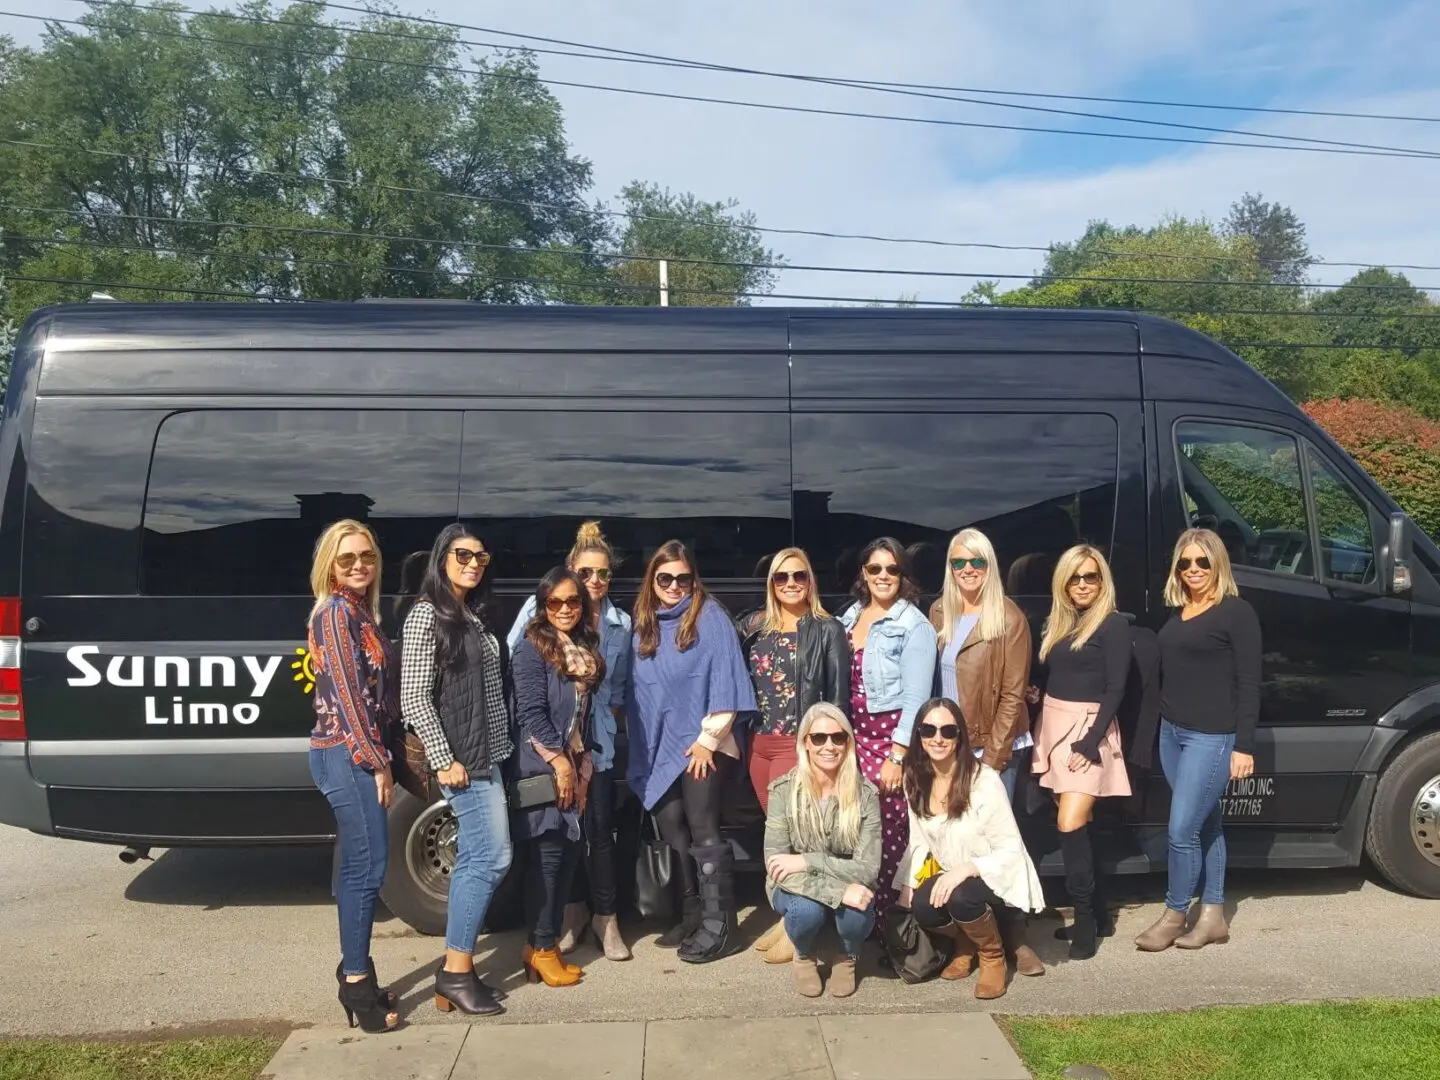 A group of women standing in front of a black limo.